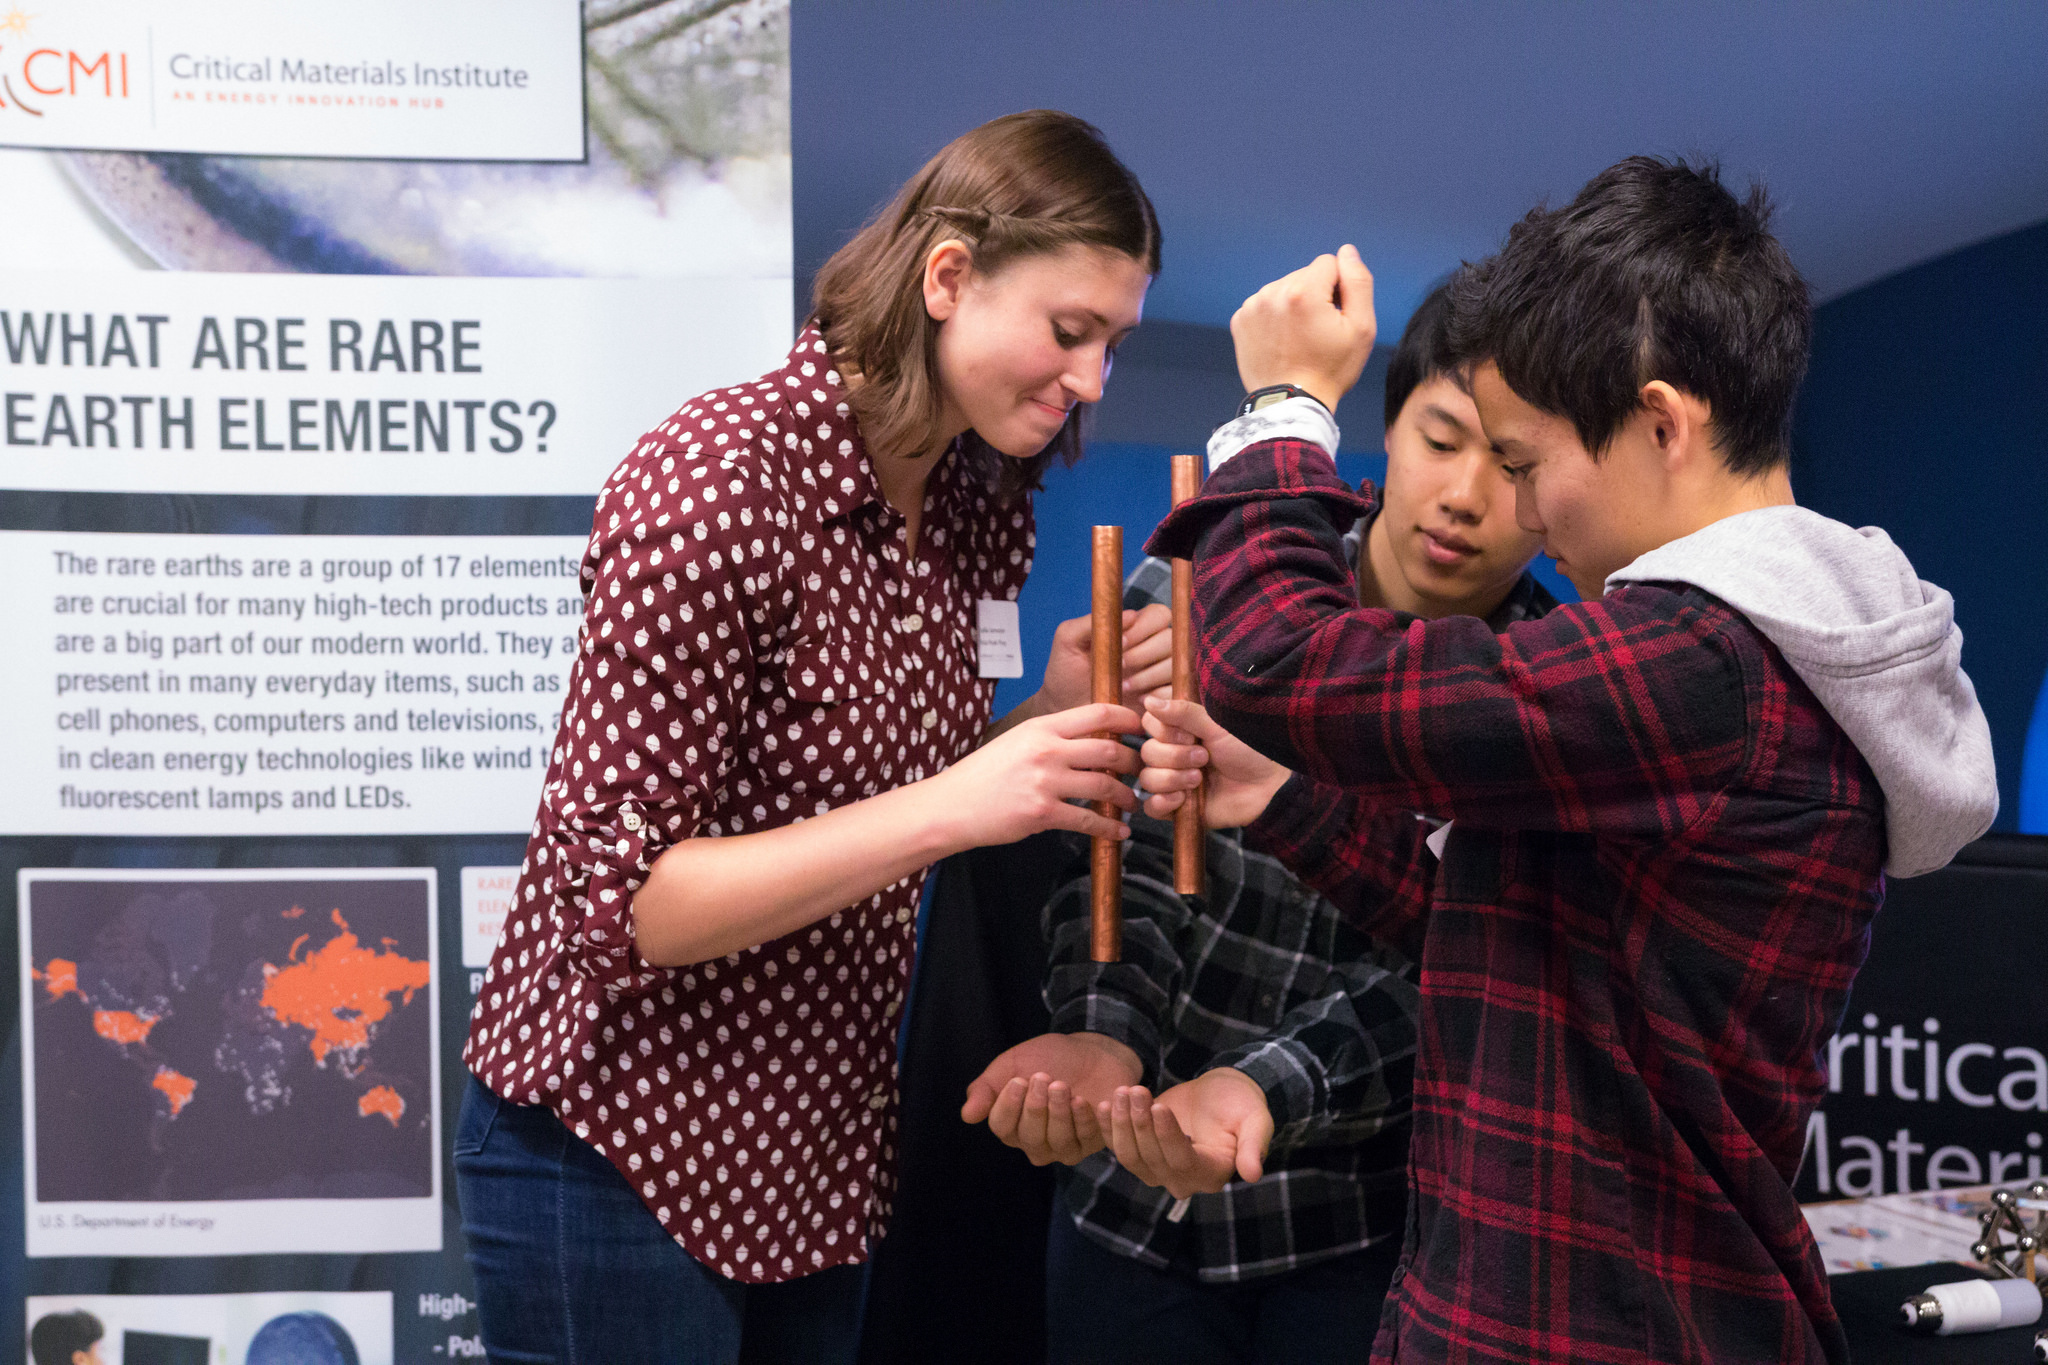 High school students participate in an interactive exercise at the Critical Materials Institute